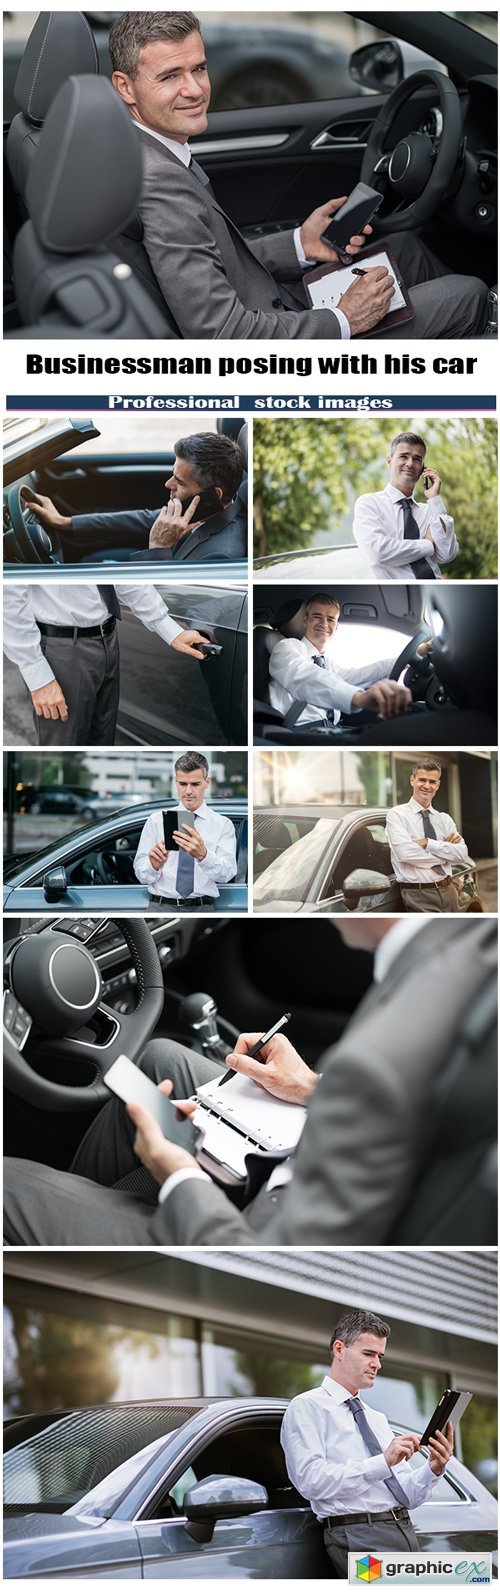 Businessman posing with his car